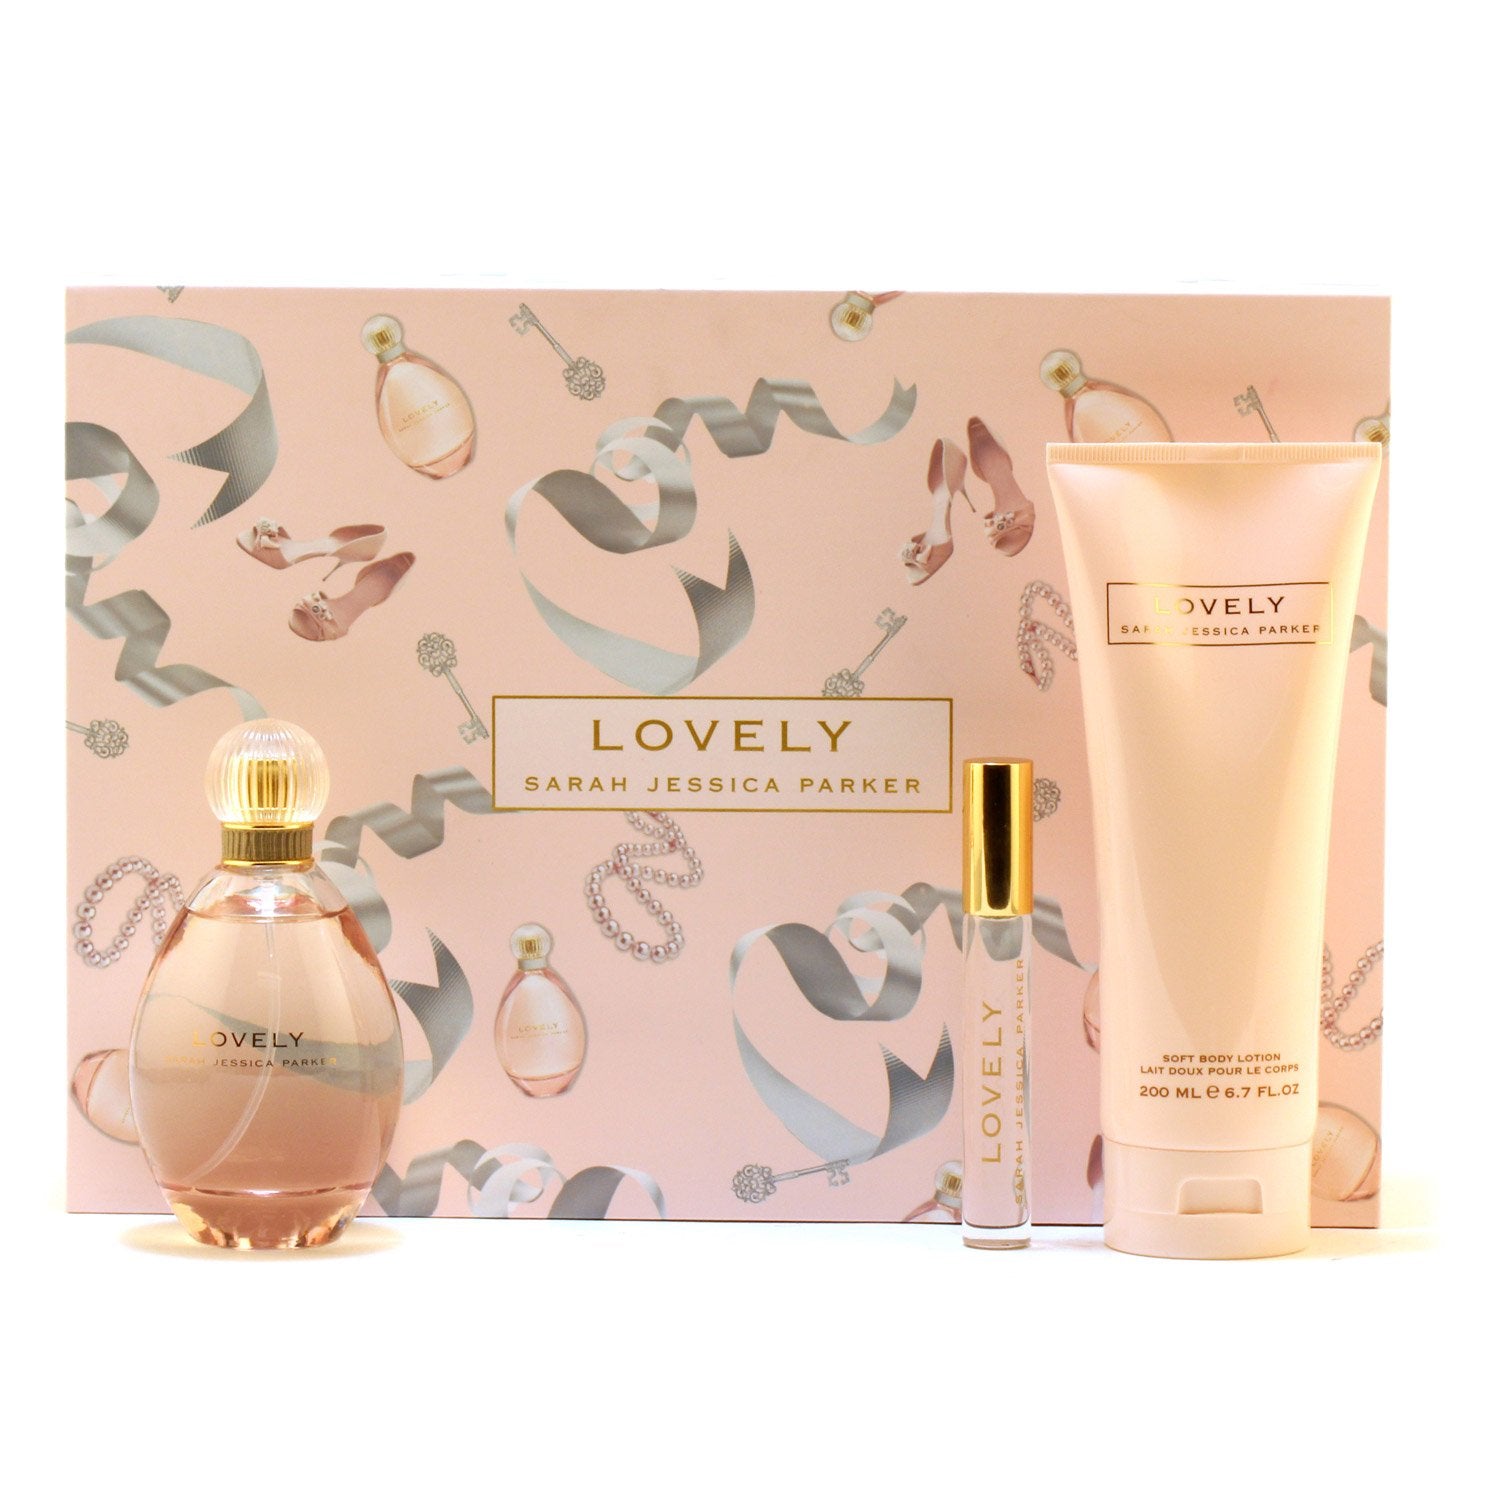 Perfume Sets - LOVELY FOR WOMEN BY SARAH JESSICA PARKER - GIFT SET